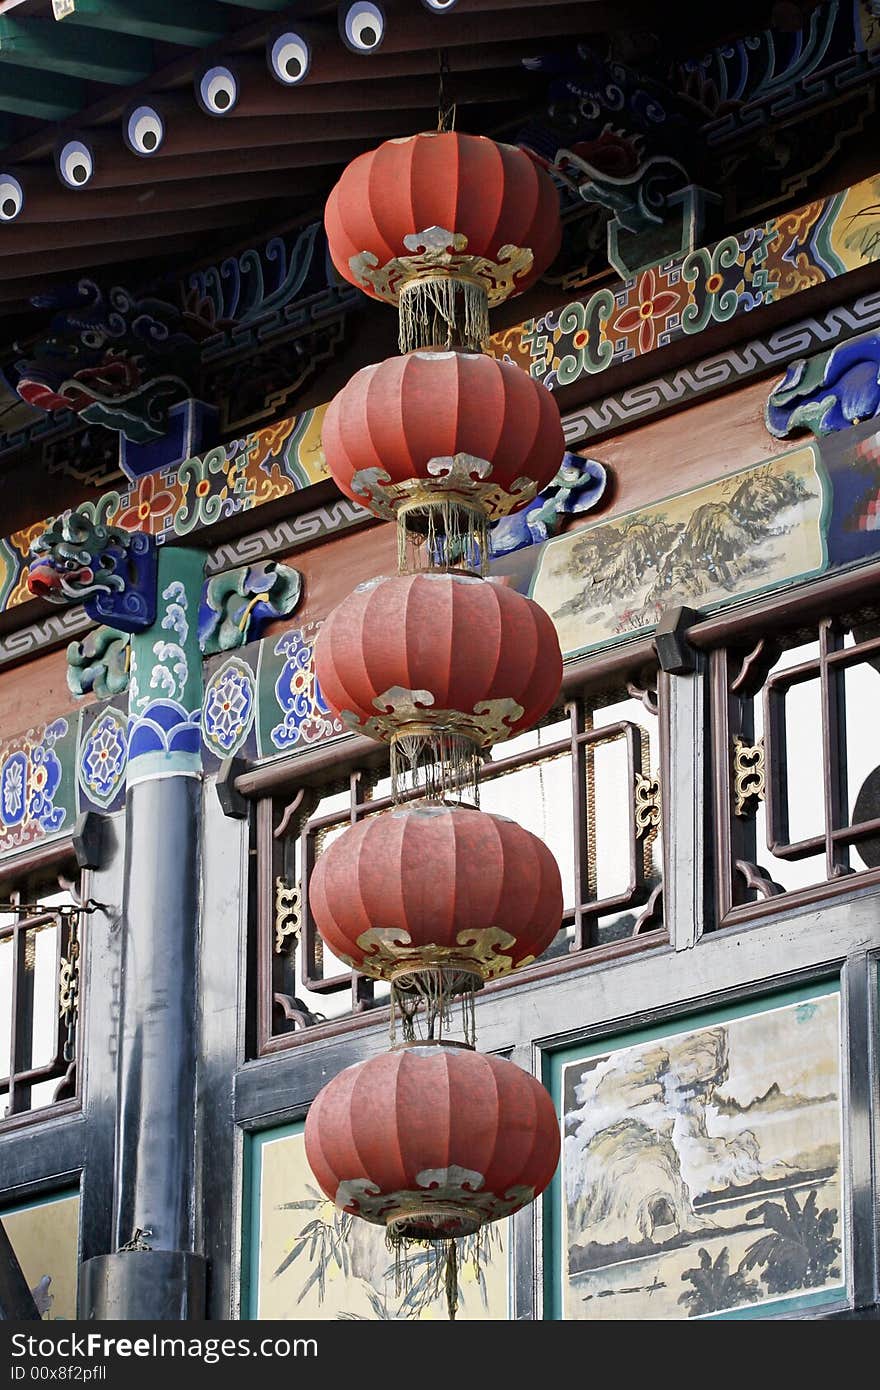 Hang the Chinese red lantern outside the ancient room.

When ancient, the symbolic meaning of the lantern should be higher than its practicability.It is harmonious, happy symbol. Hang the Chinese red lantern outside the ancient room.

When ancient, the symbolic meaning of the lantern should be higher than its practicability.It is harmonious, happy symbol.